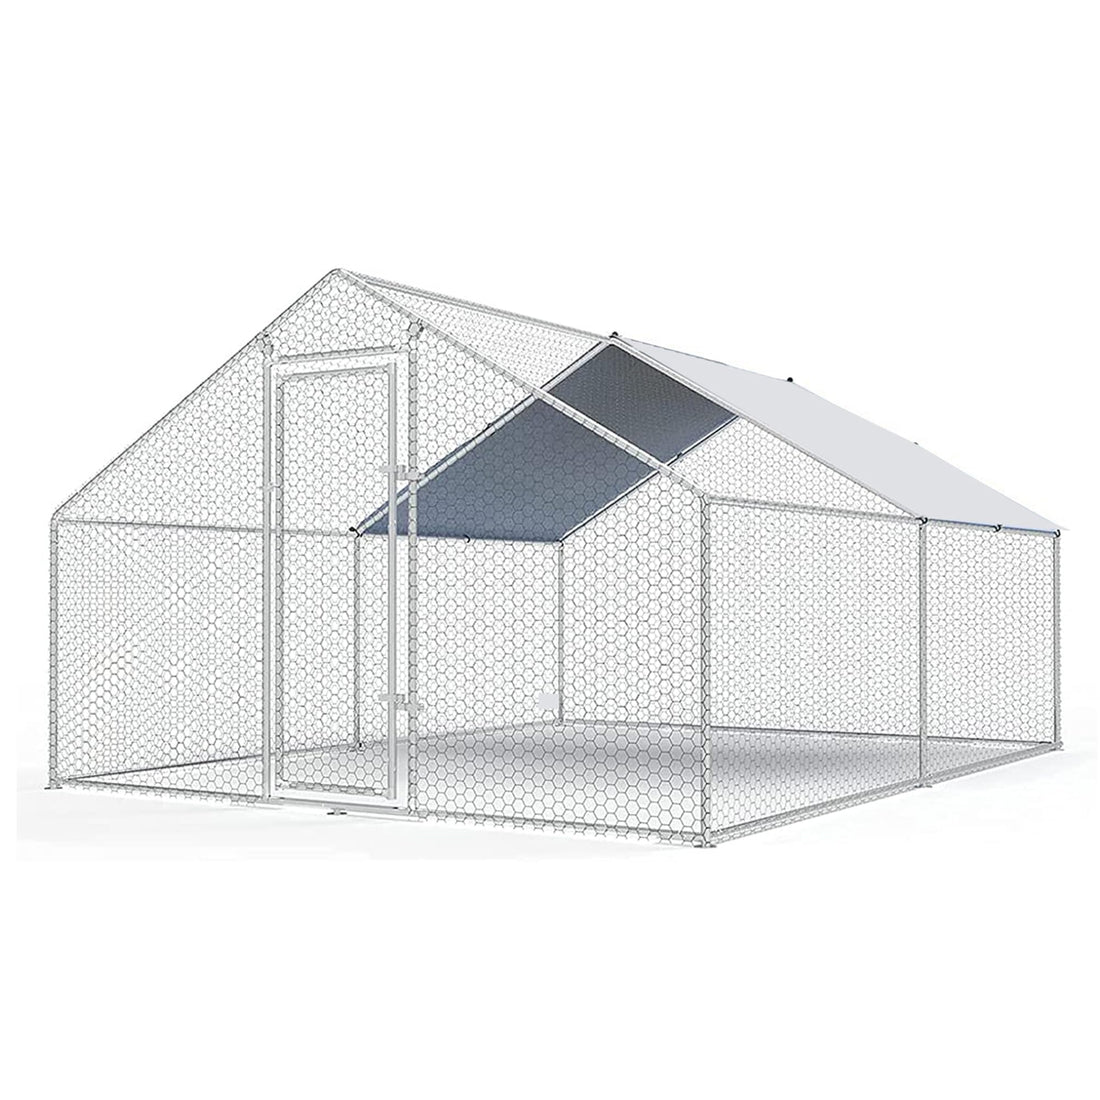 Large Chicken Coop, Metal Chicken Run for Yard with Waterproof and Anti-UV Cover, Walk in Fence Cage for Outdoor Farm Use 13.1ft x 9.8ft x 6.4ft